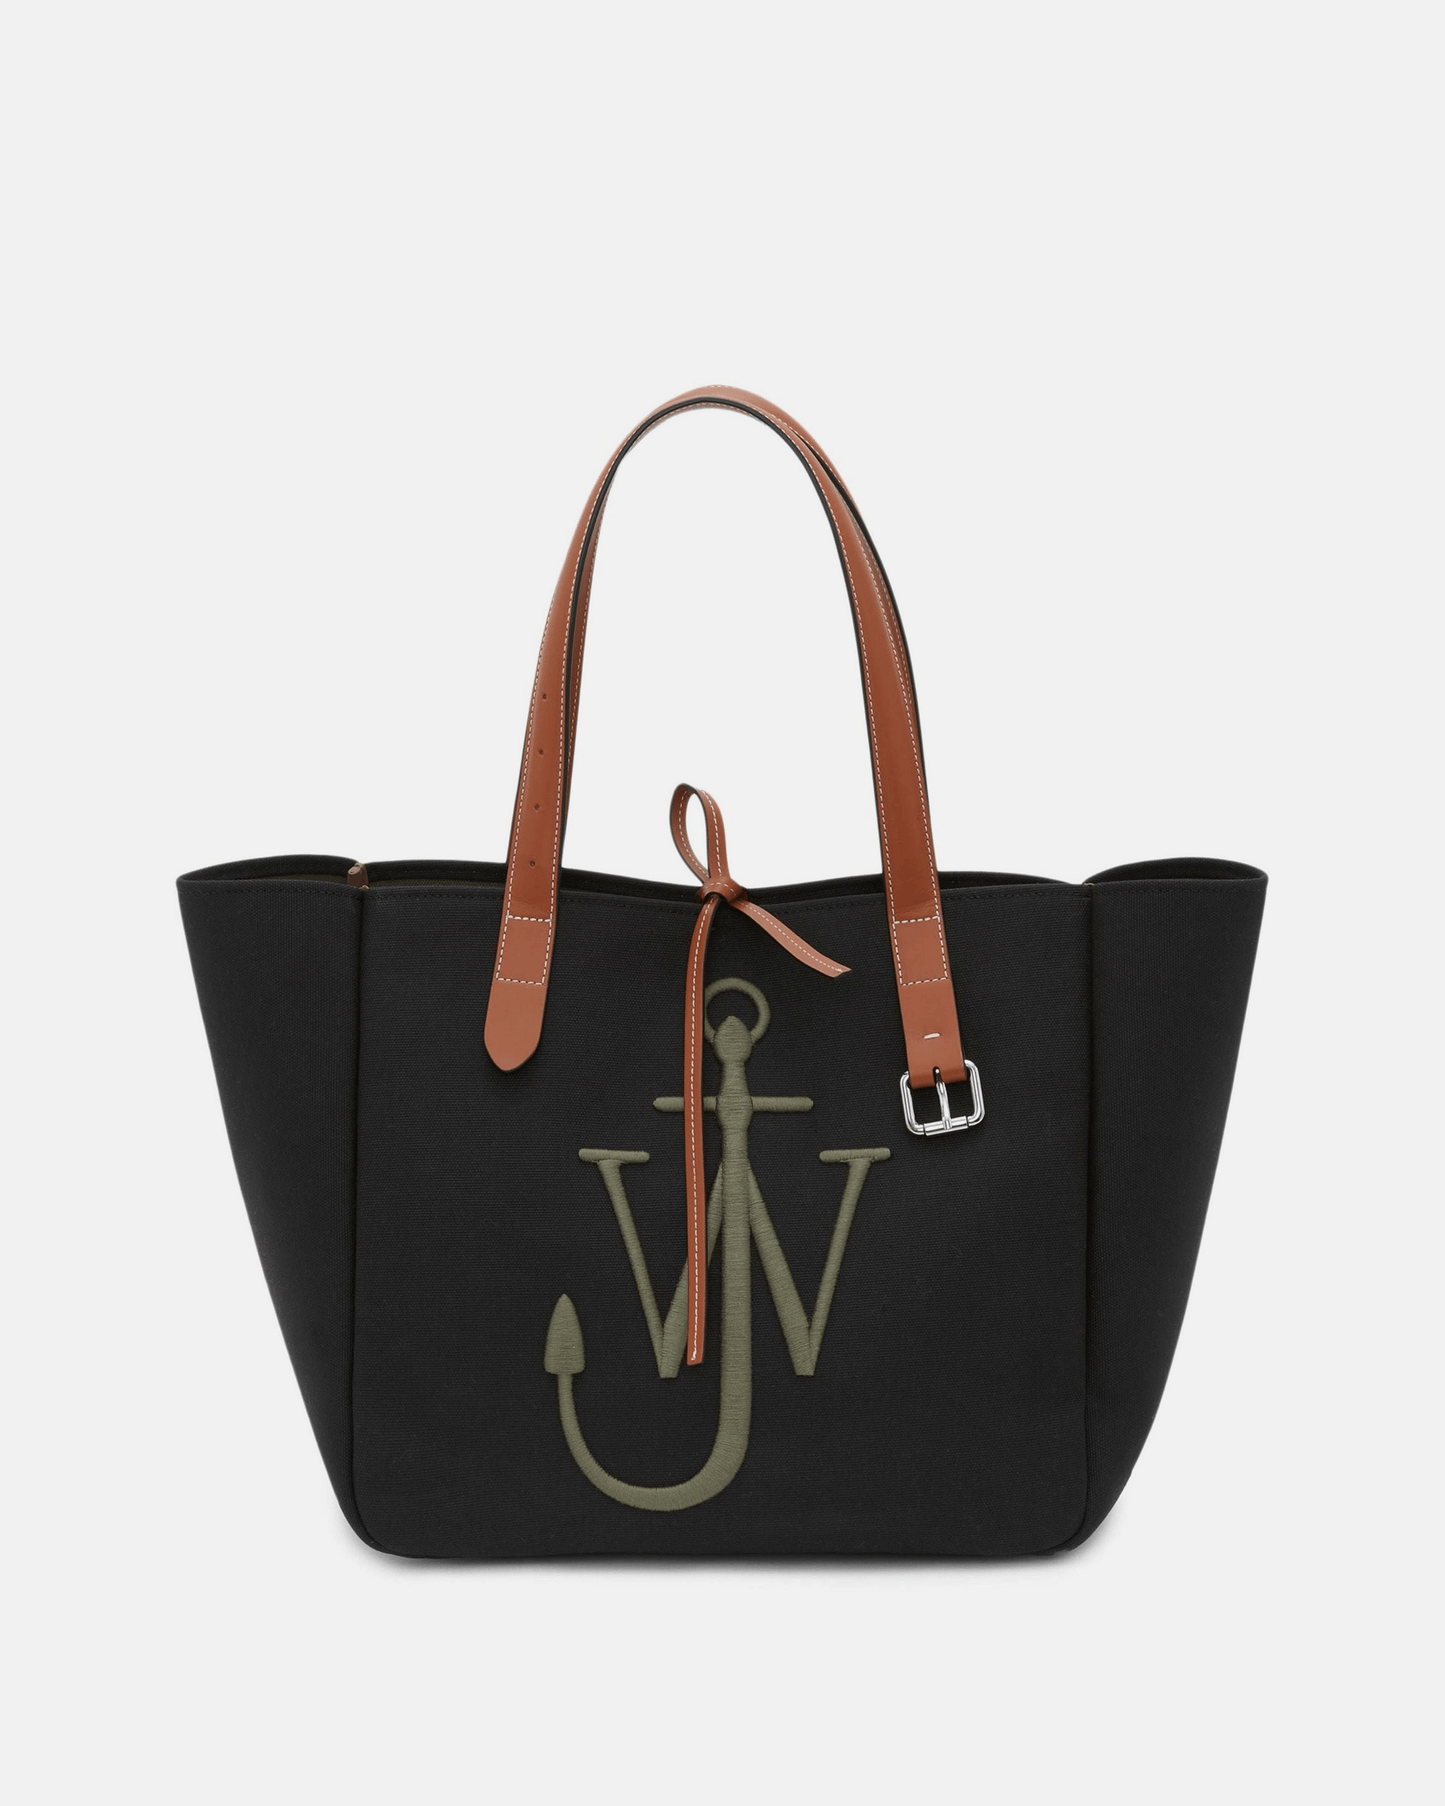 JW Anderson Men's Bags Recycled Canvas Belt Tote in Black